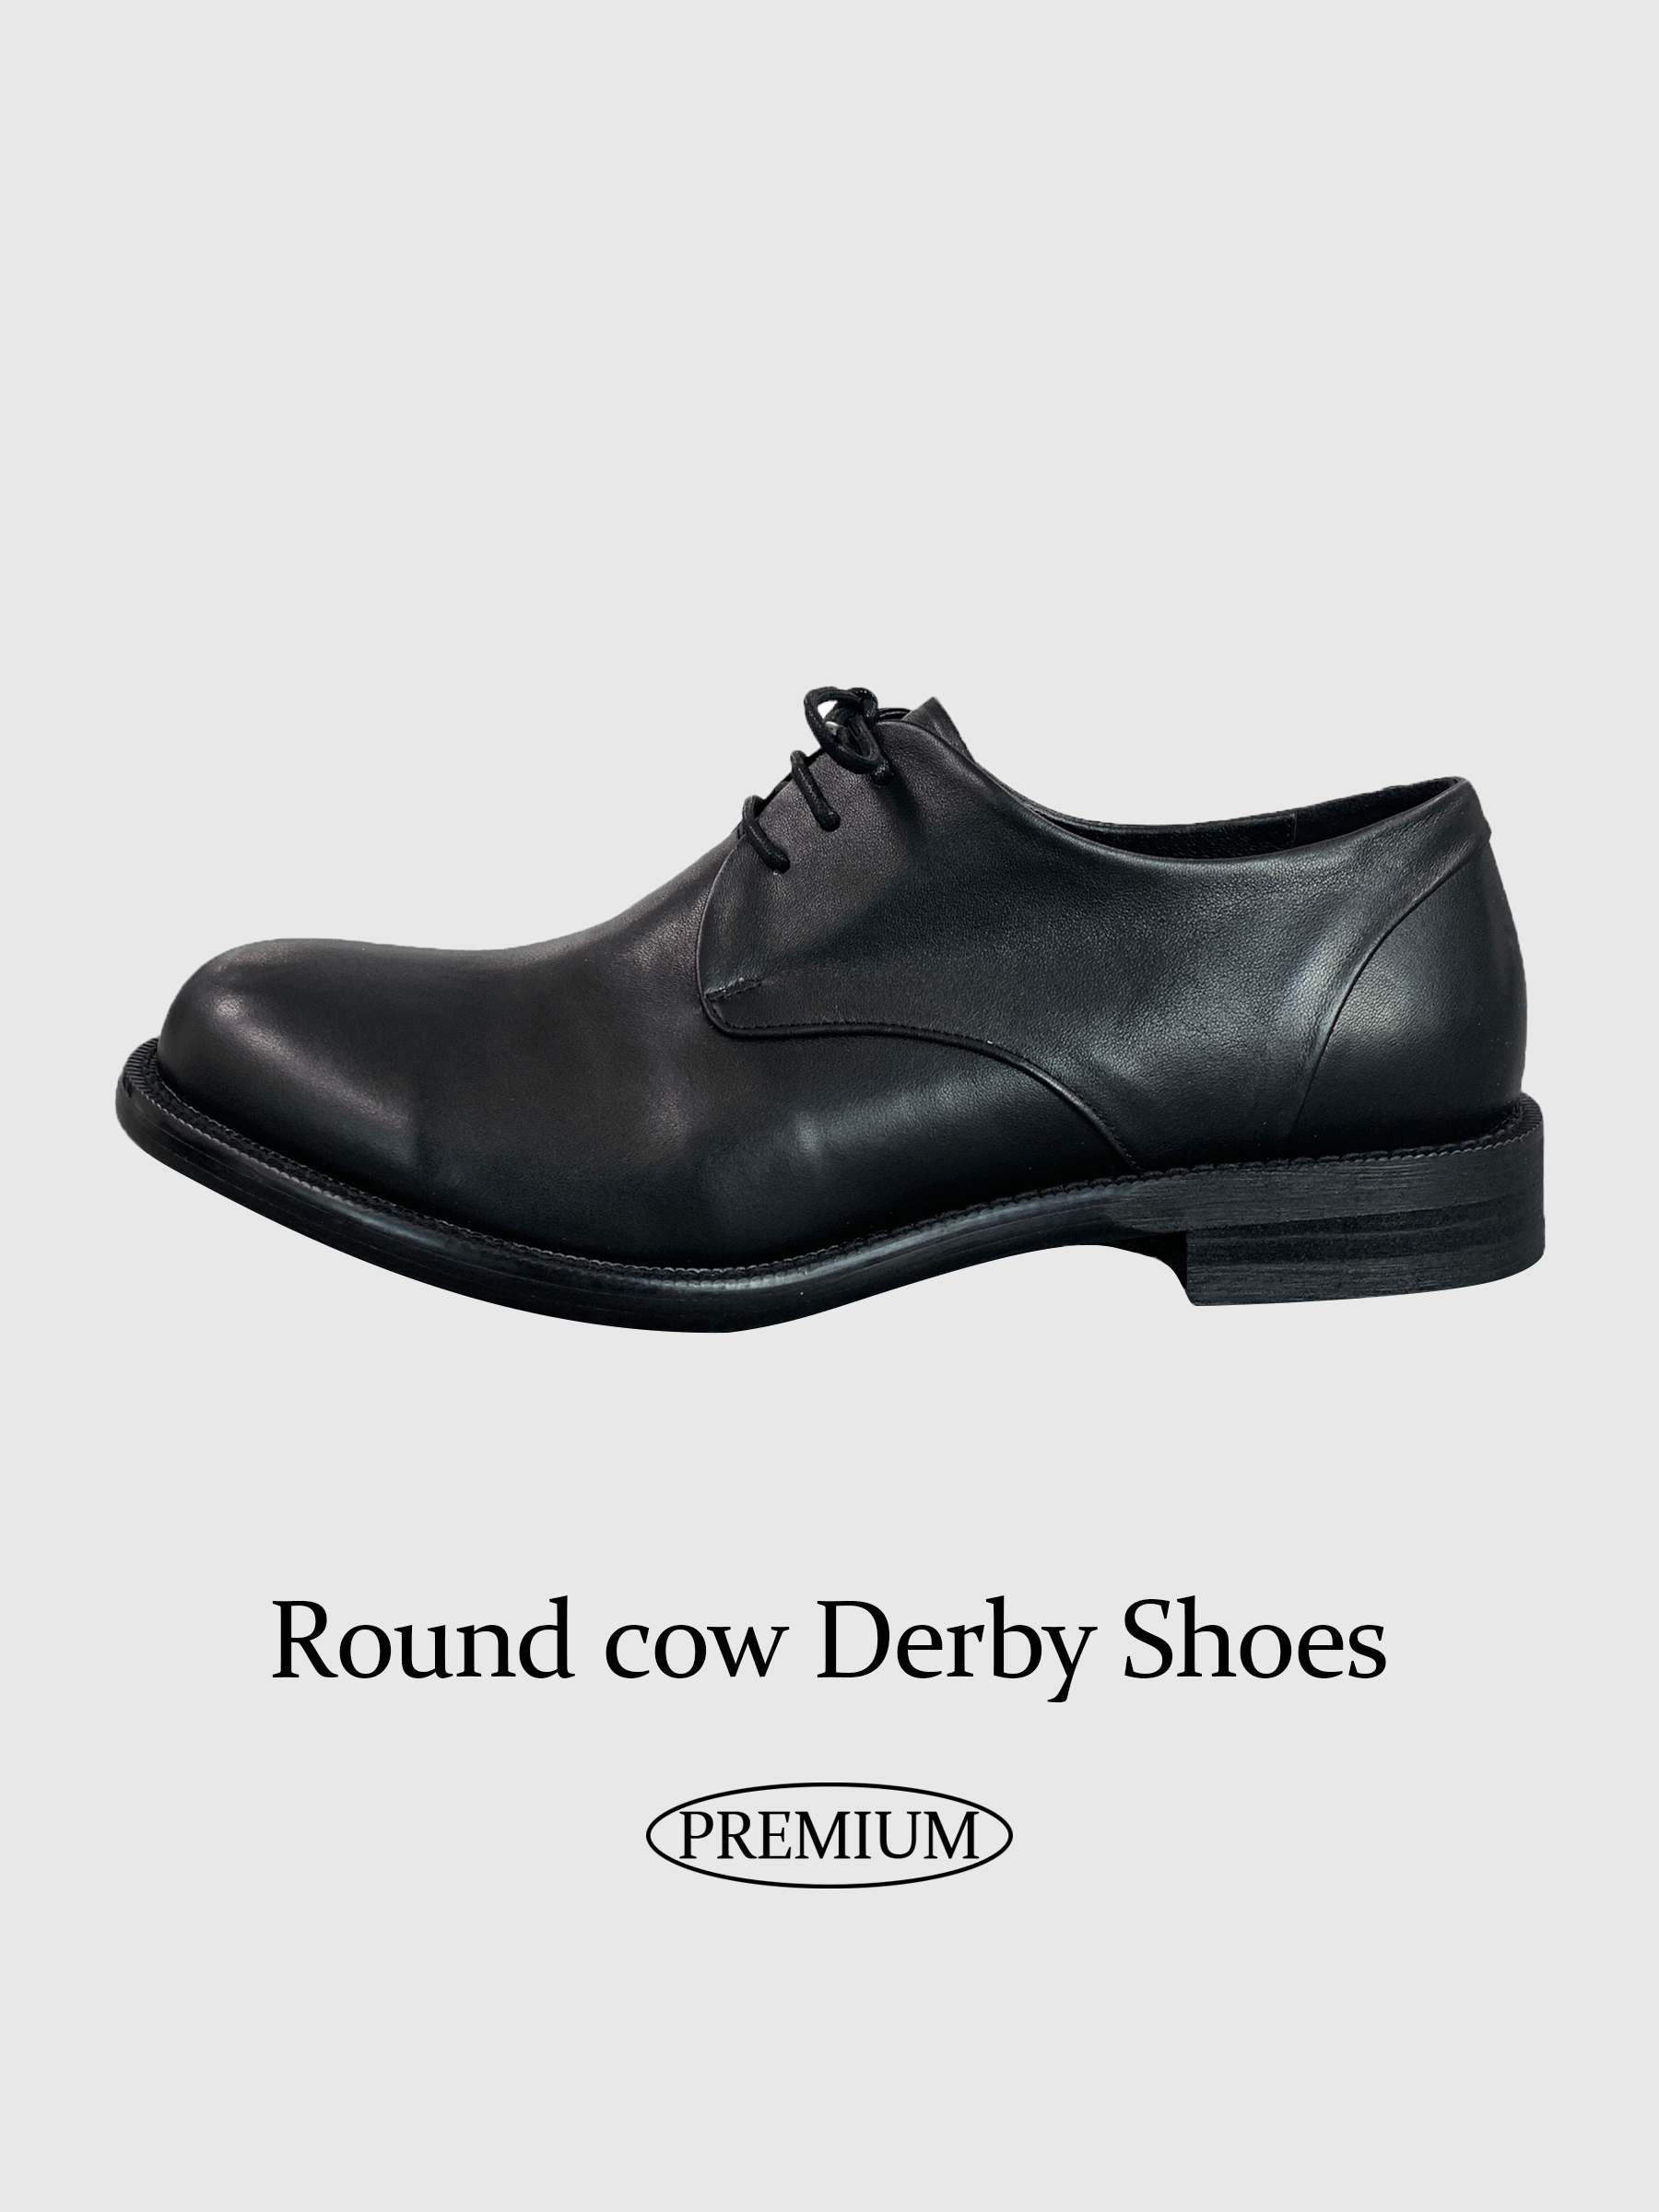 Round cow Derby Shoes [High Quality!]